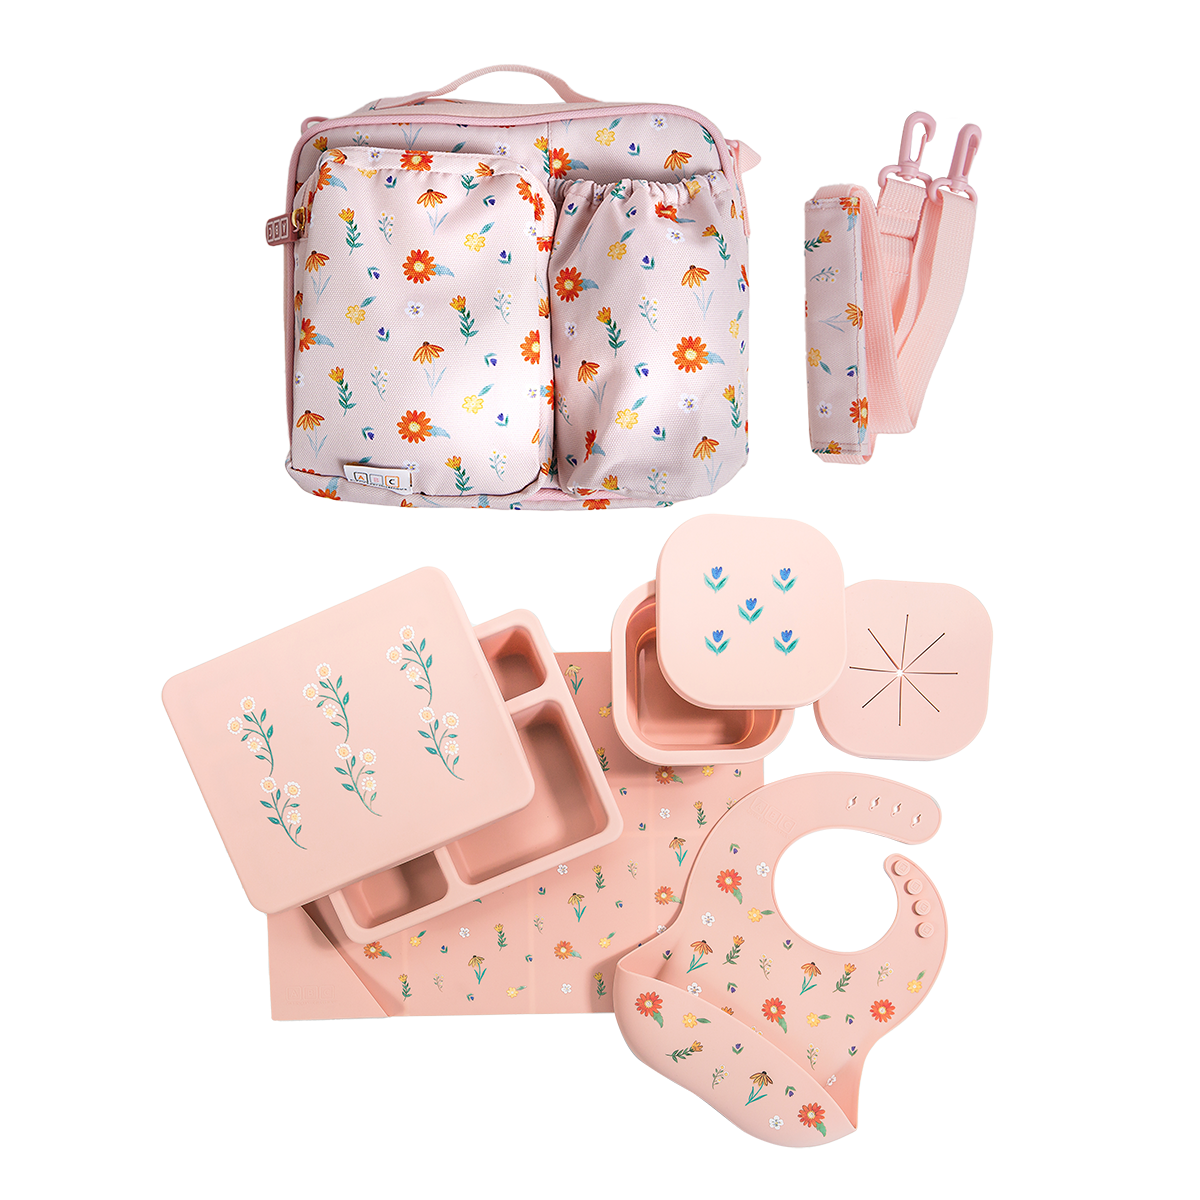 pink lunch bag, silicone lunch bento box, snack bowl, placemat, and bib in wildflower print